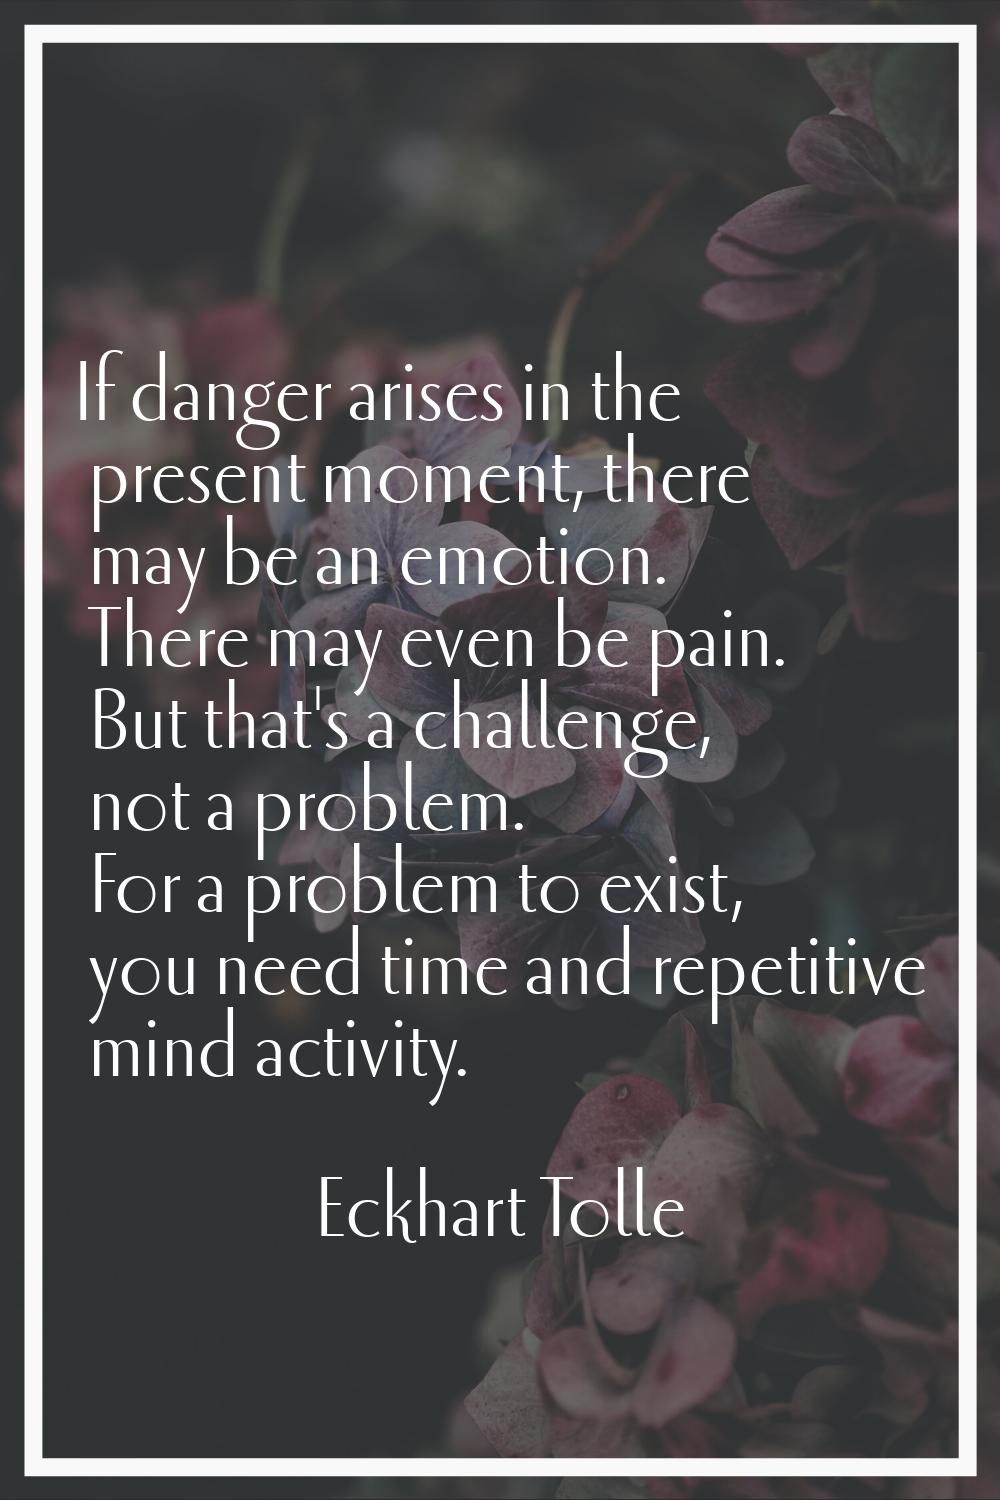 If danger arises in the present moment, there may be an emotion. There may even be pain. But that's